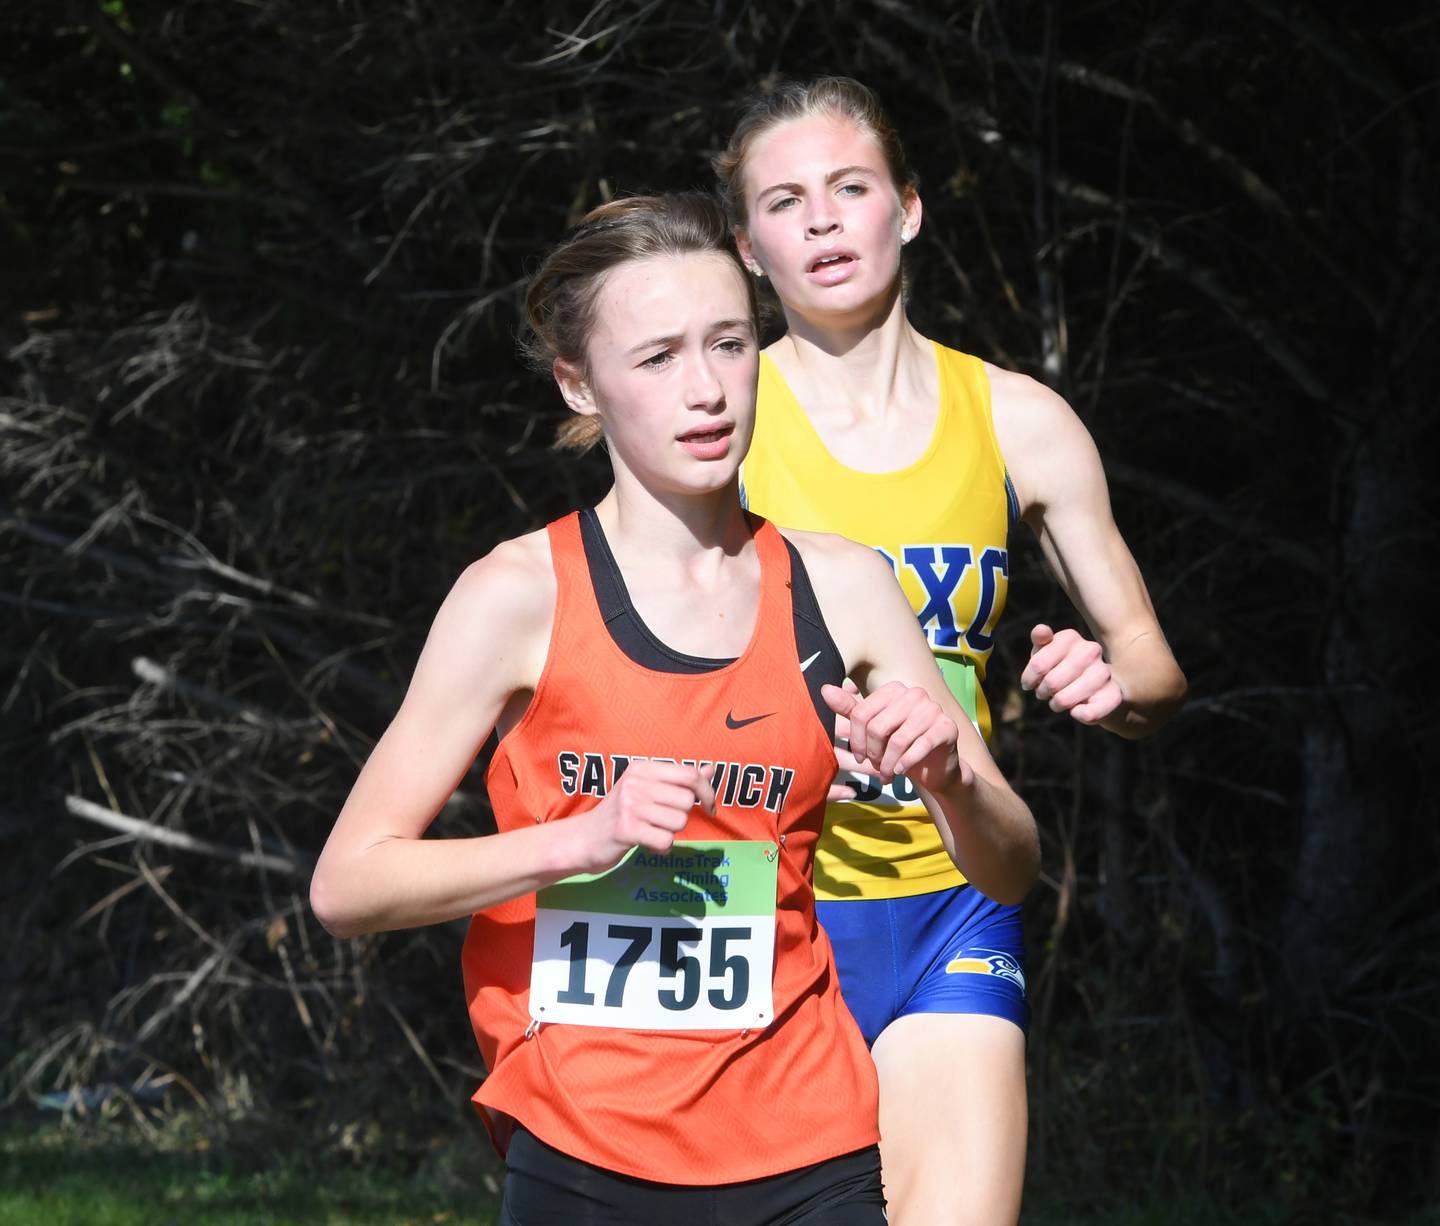 Sandwich's Sundara Weber and Johnsburg's Jolene Cashmore race at the 1A Oregon Sectional on Saturday, Oct. 29. Weber won the race in 18:26 and Cashmore finished second in 18:48.30.